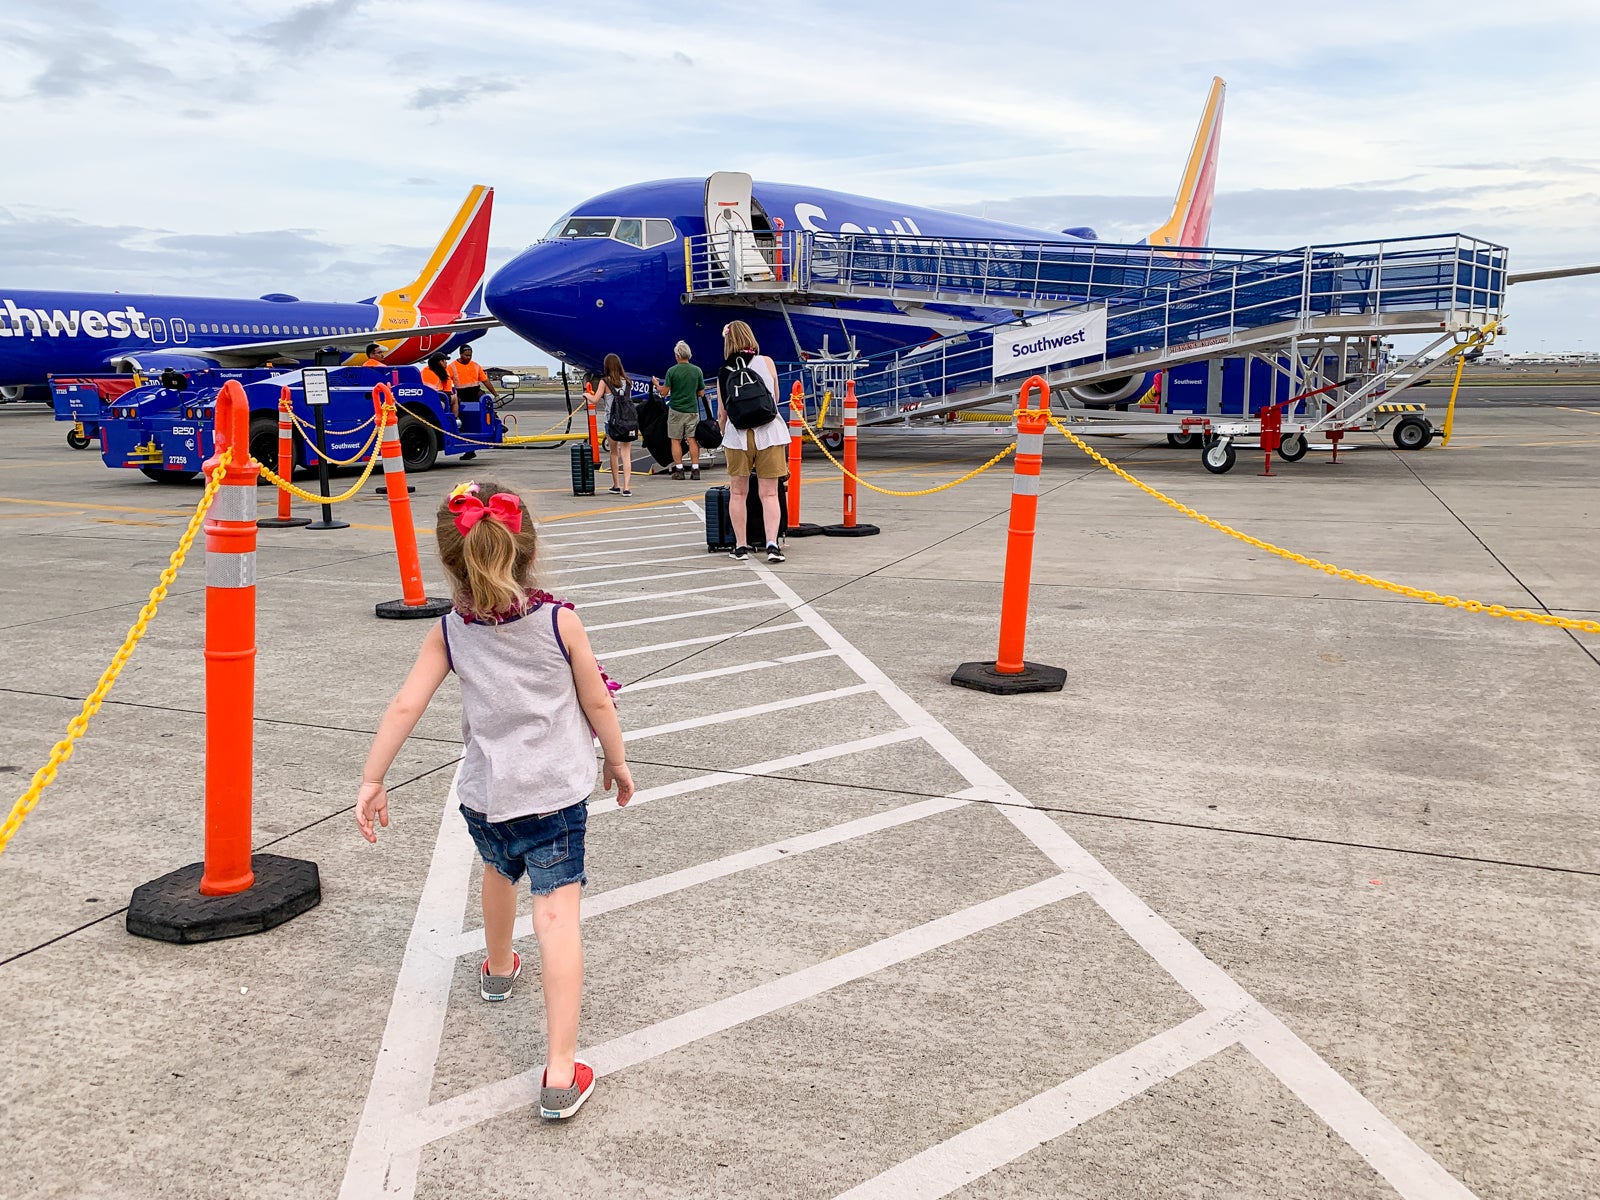 Southwest makes it easy to island-hop in Hawaii. (Photo by Summer Hull/The Points Guy)